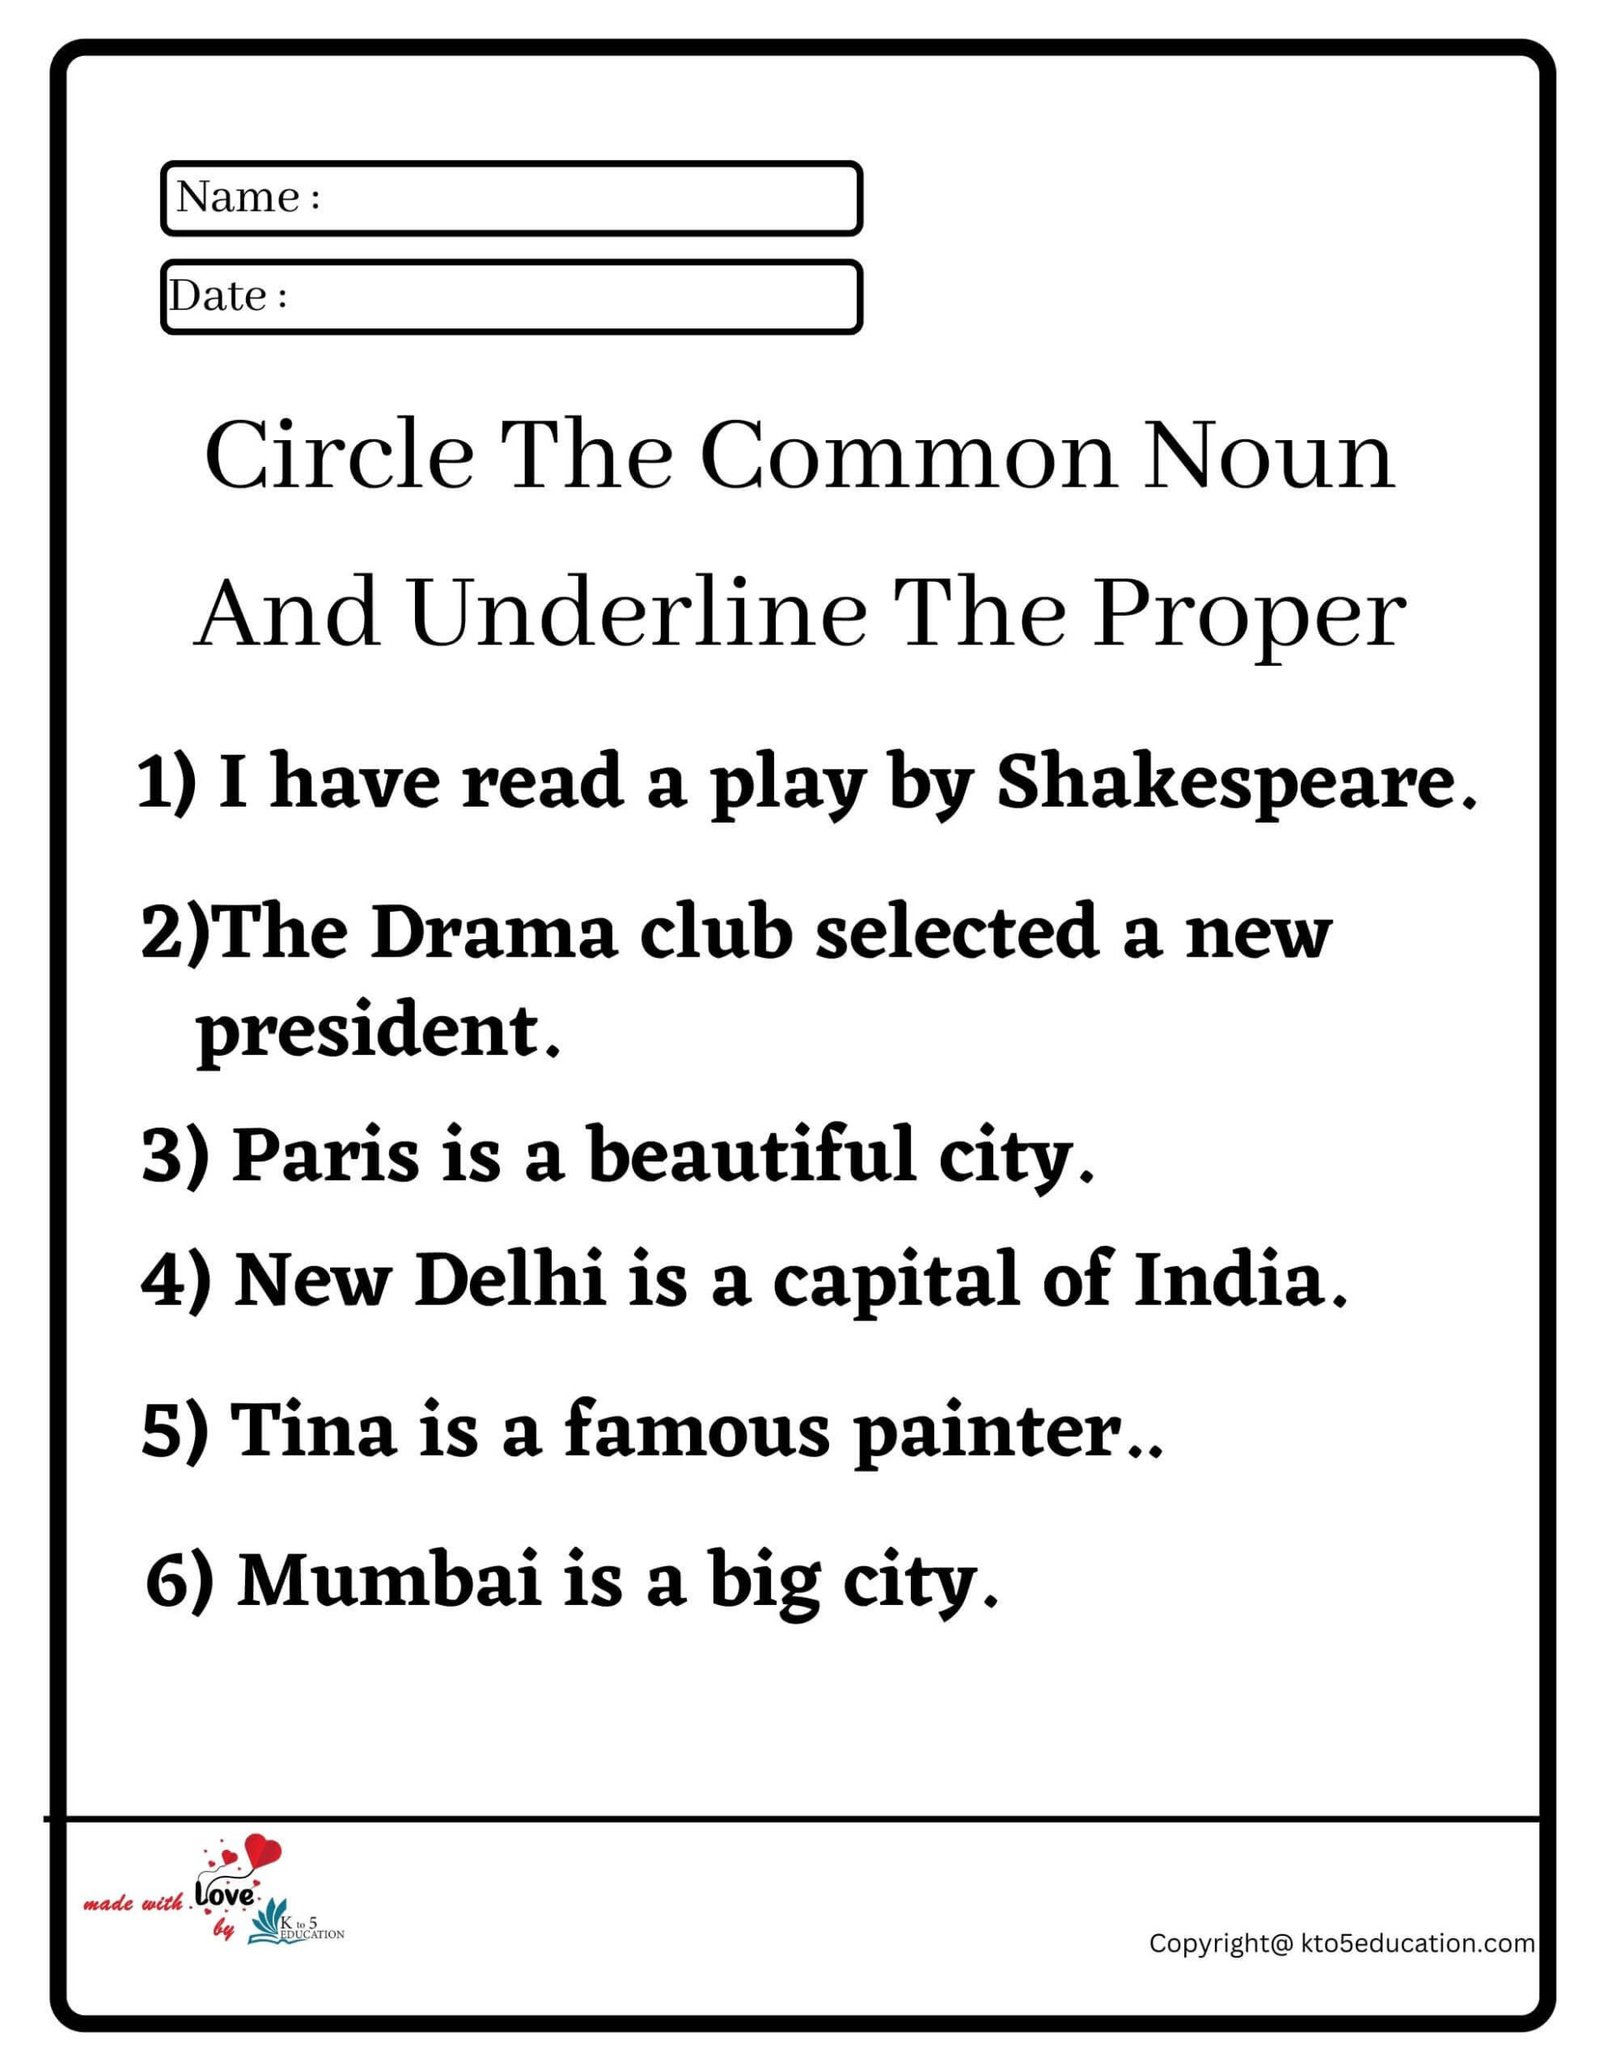 circle-the-common-noun-and-underline-the-proper-worksheet